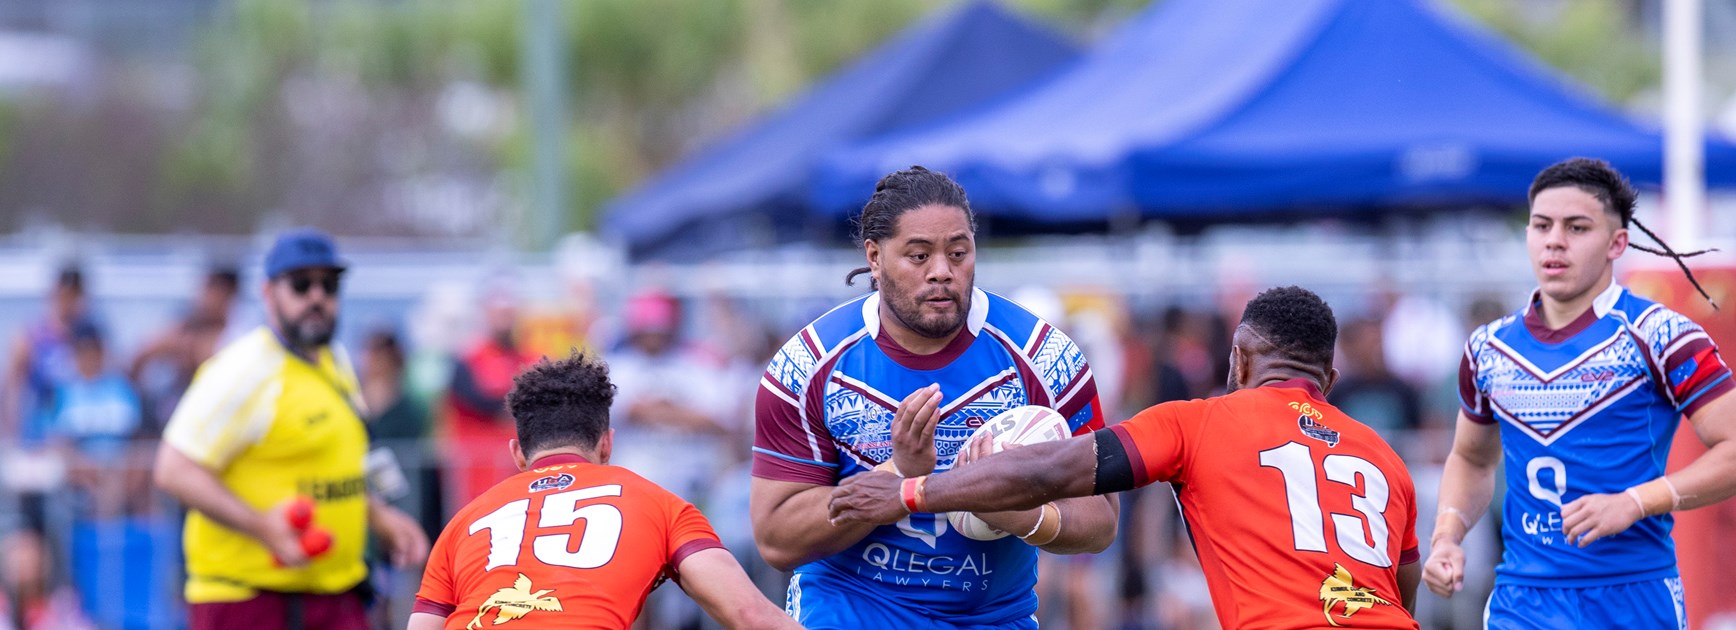 Samoa dominated the Queensland Pacific Islander Cultural Carnival, winning five of the seven finals